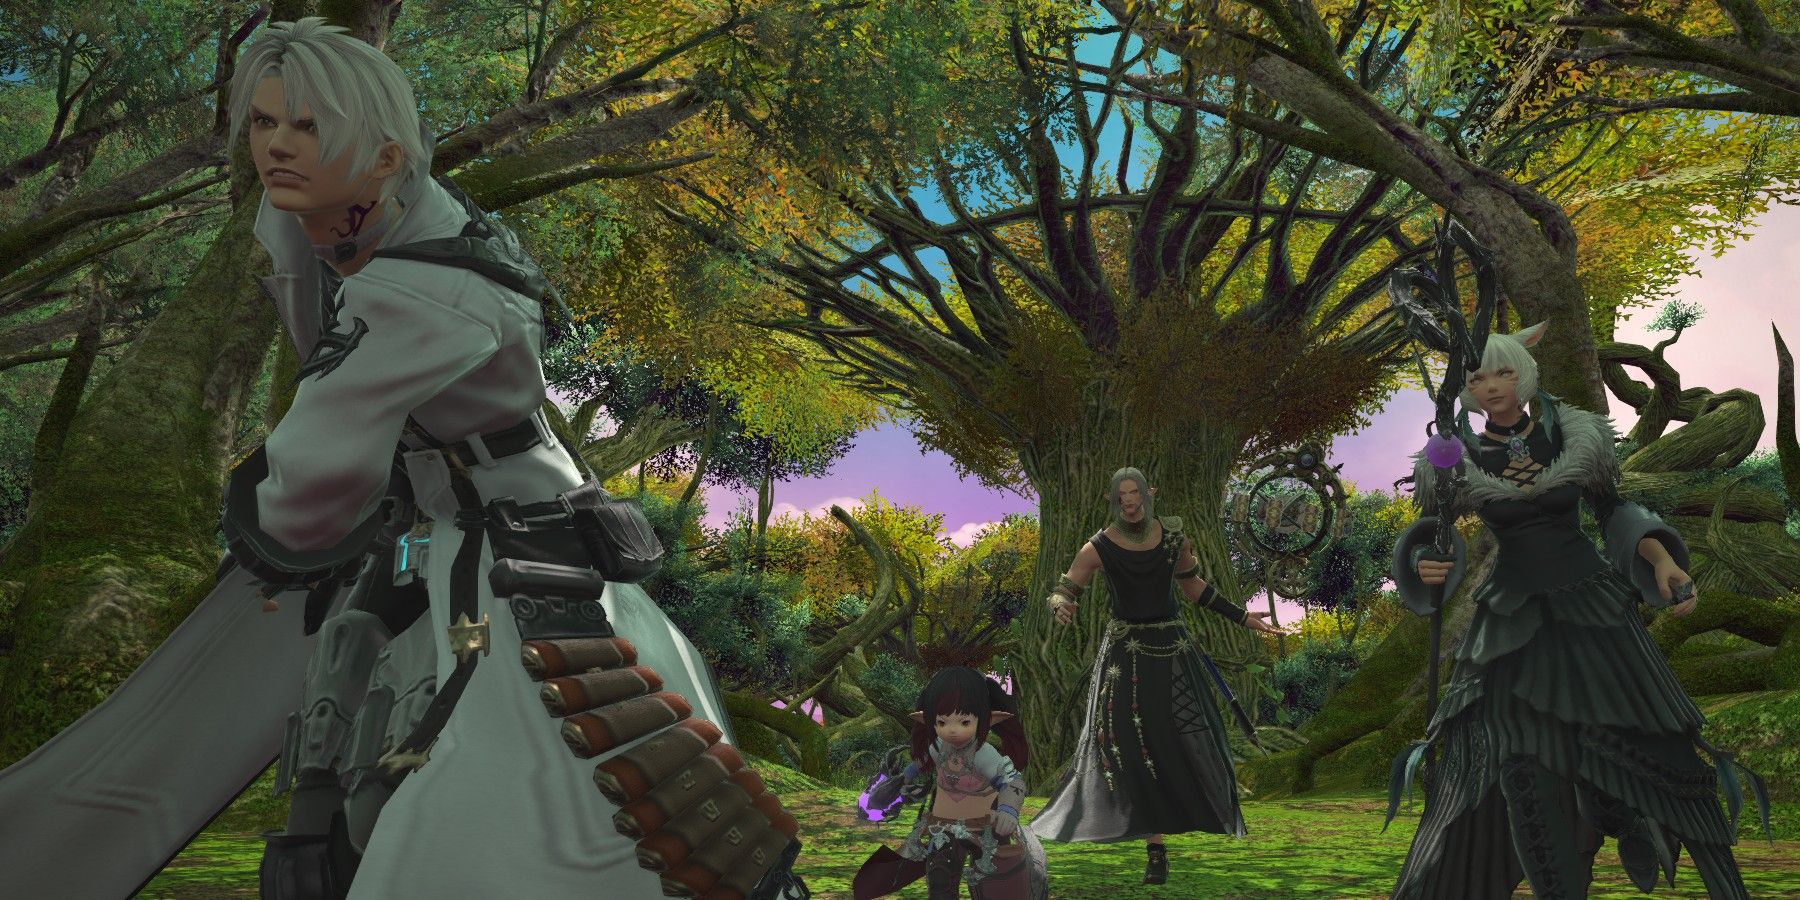 The Pros and Cons of FFXIV's Trust System